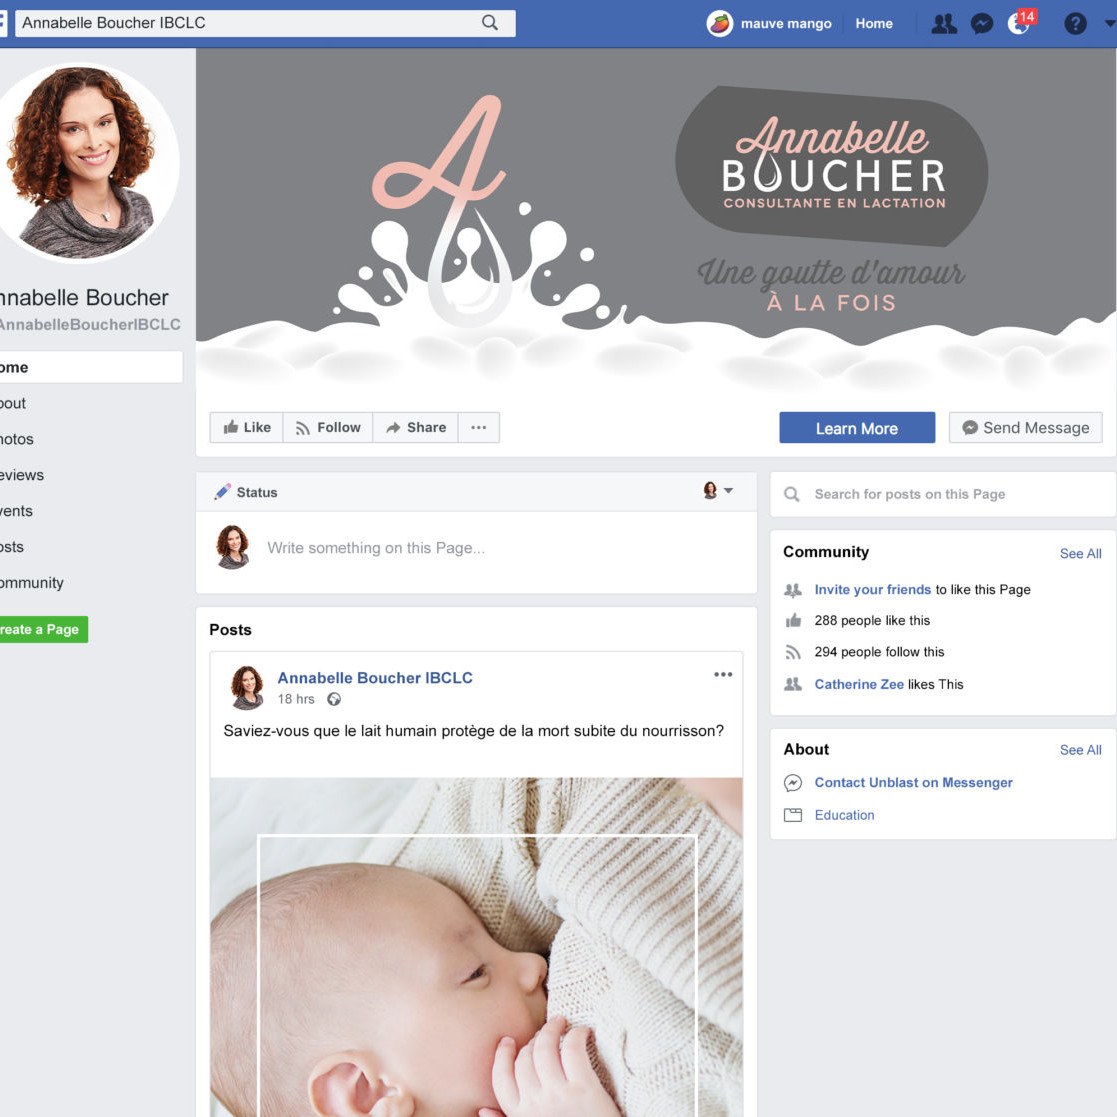 Facebook page of lactation consultant Annabelle Boucher, IBCLC with picture of baby breastfeeding.